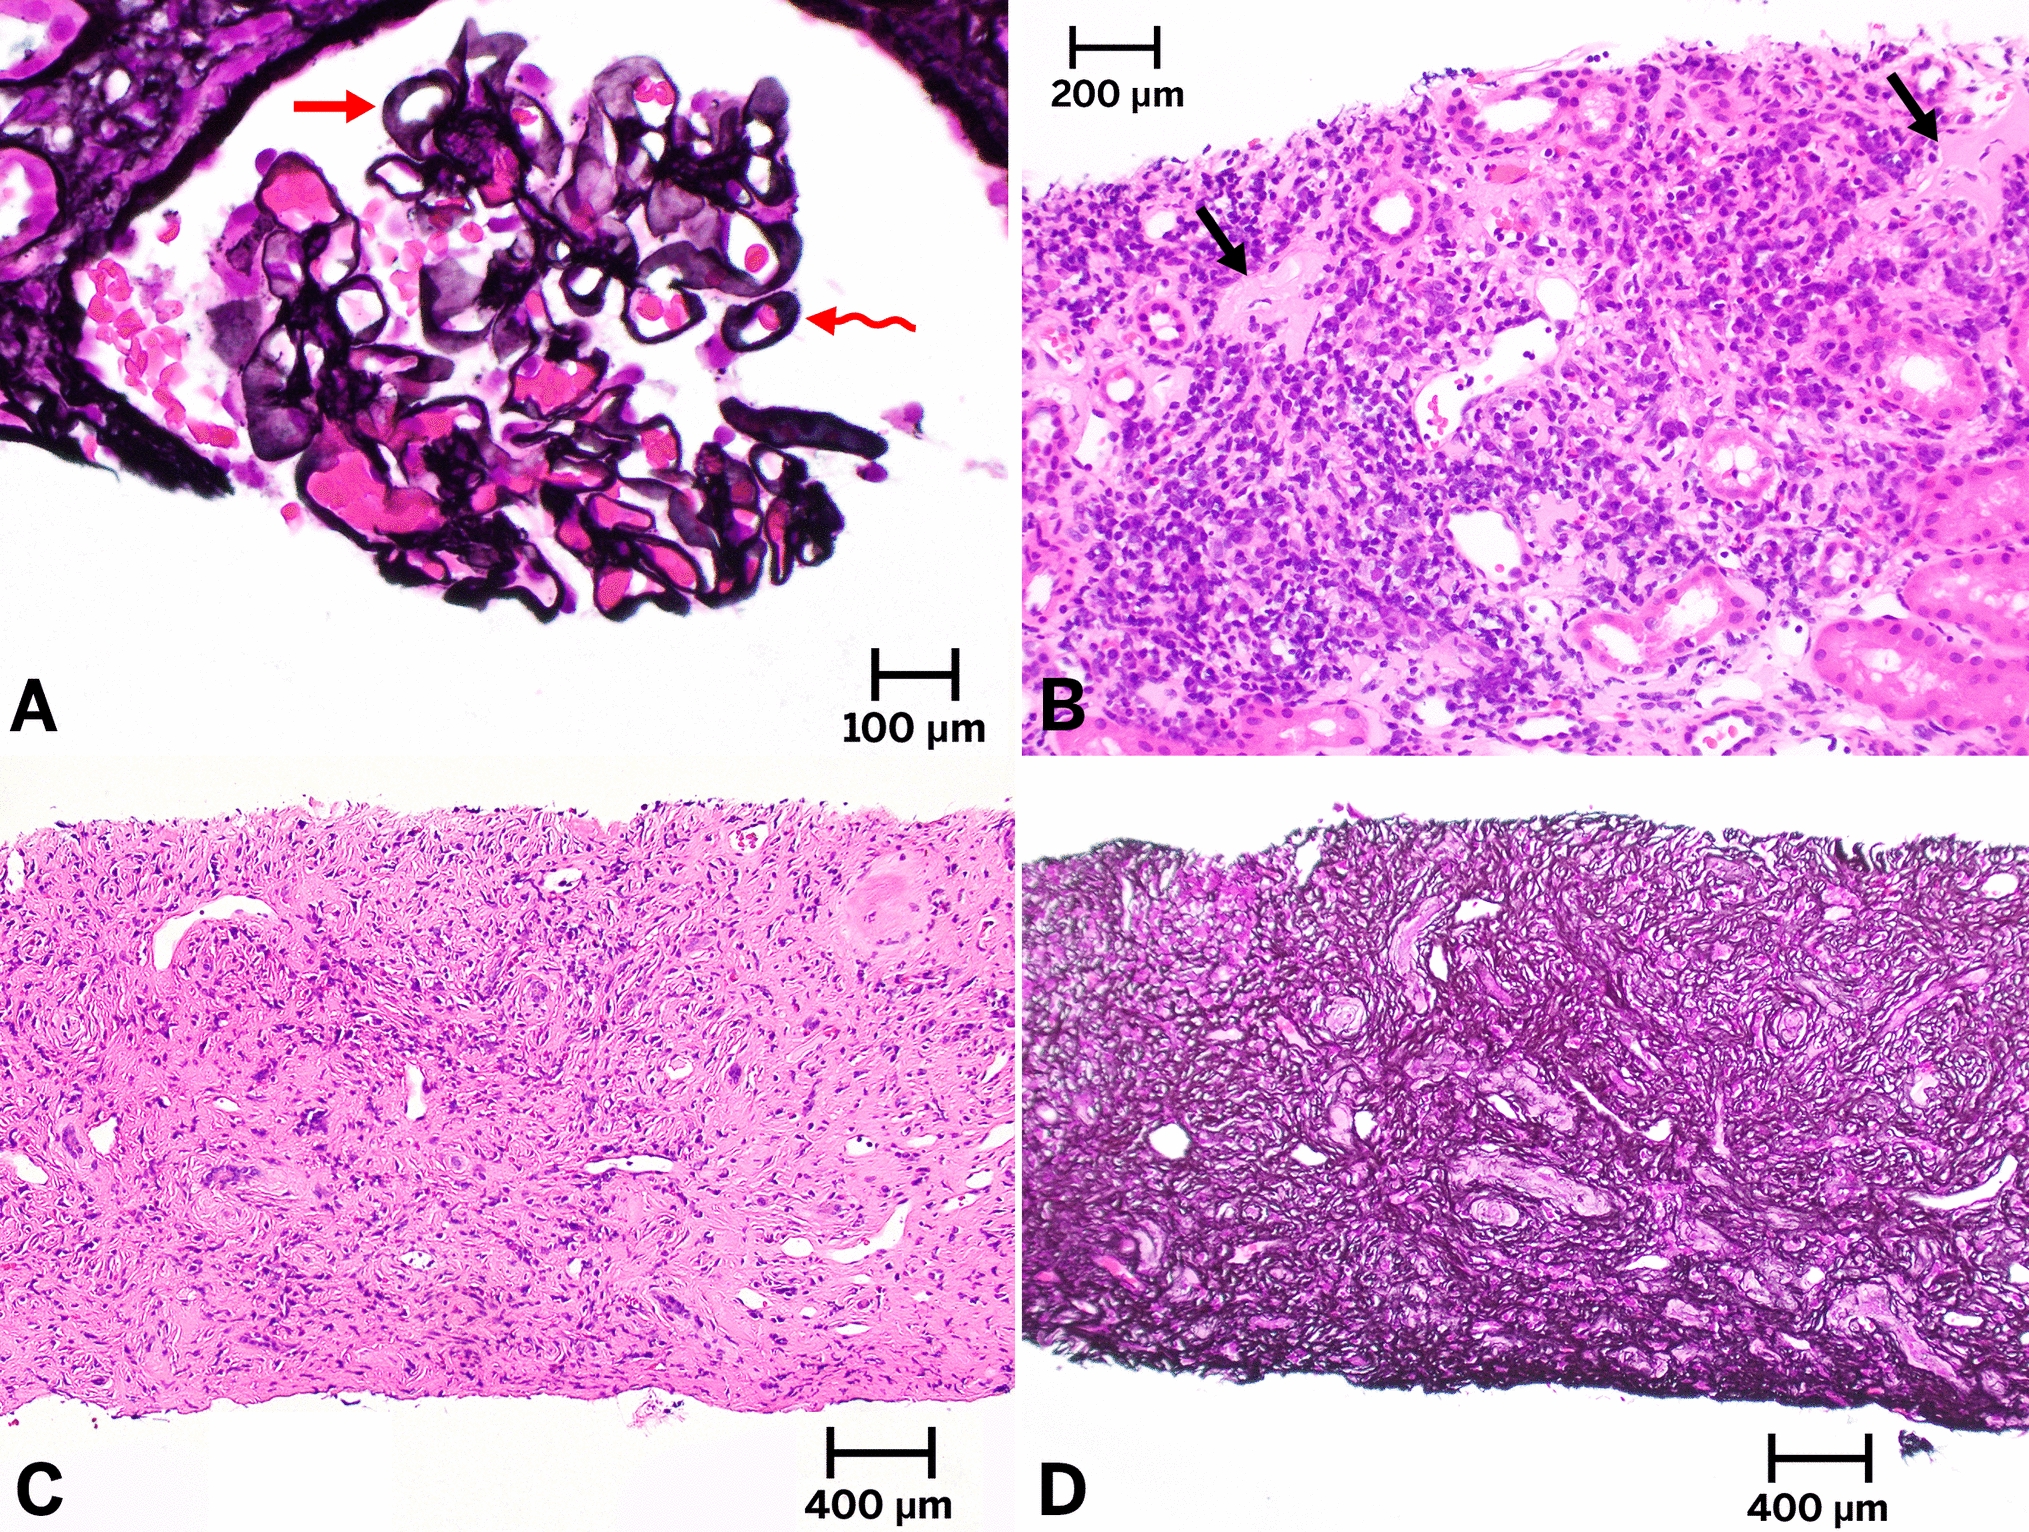 ALECT2 amyloidosis with concurrent IgG4-related interstitial nephritis, membranous nephropathy and diabetic kidney disease: a case report and literature review